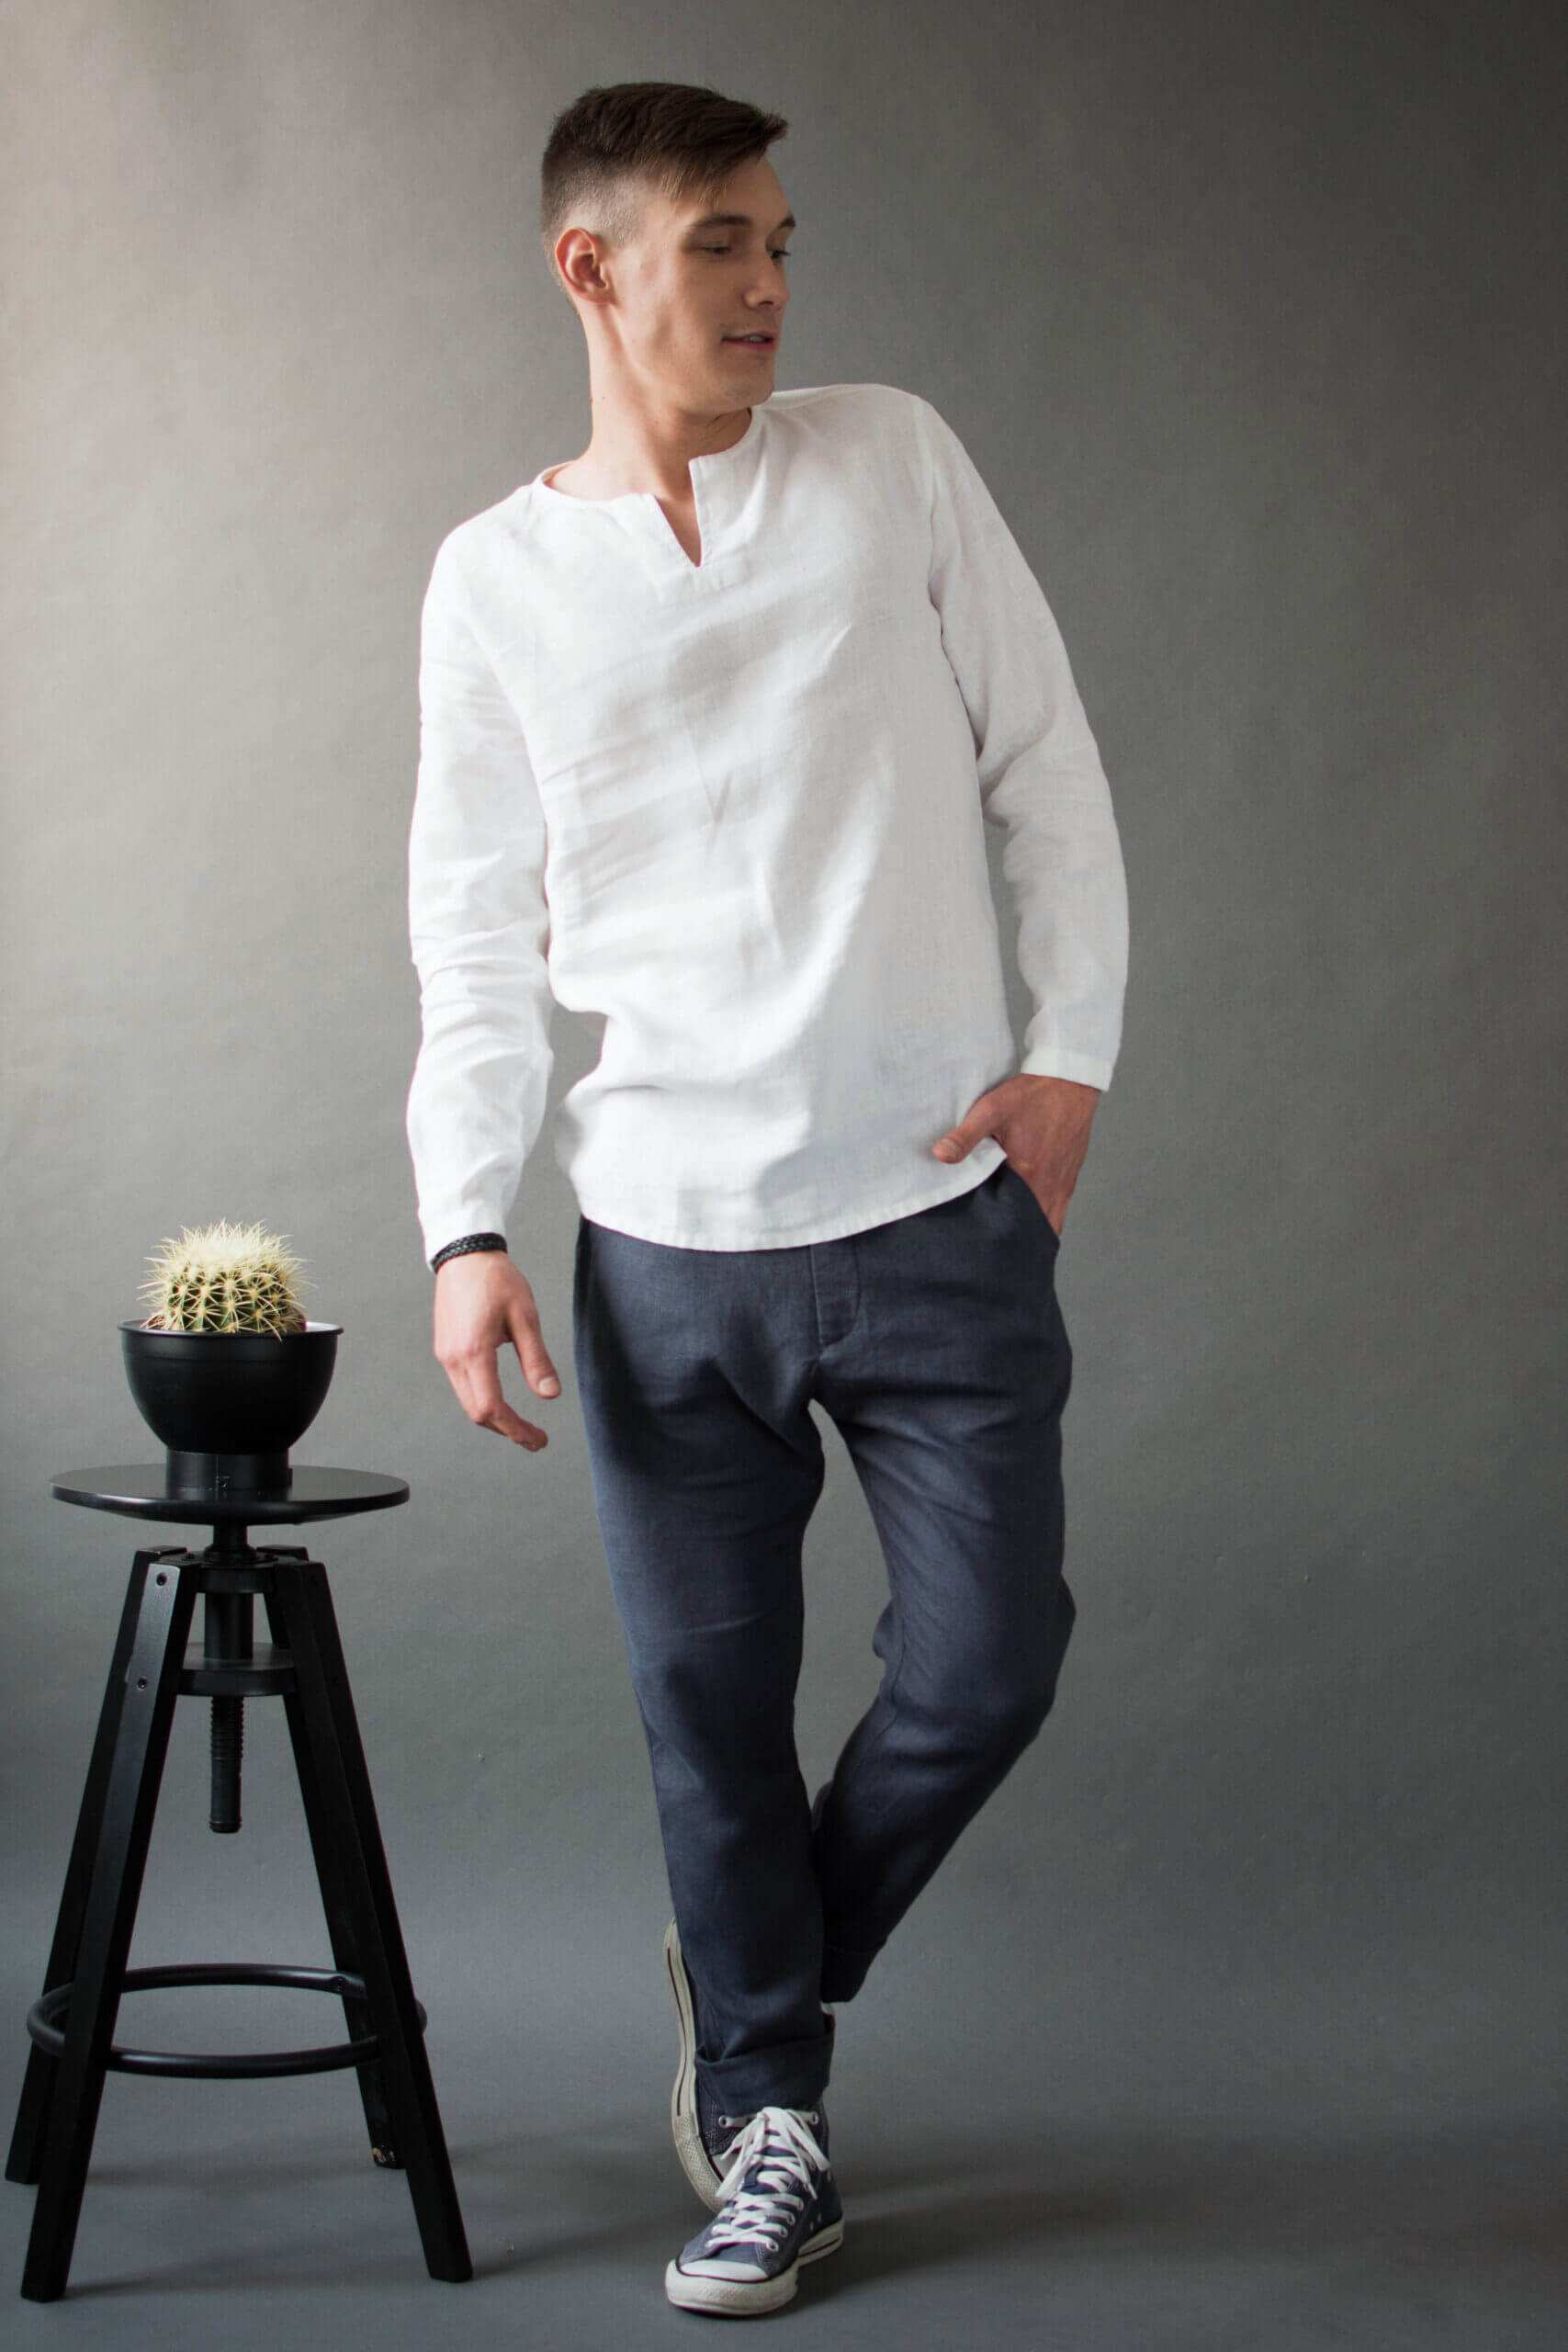 White linen v-neck shirt complemented by graphite chino pants